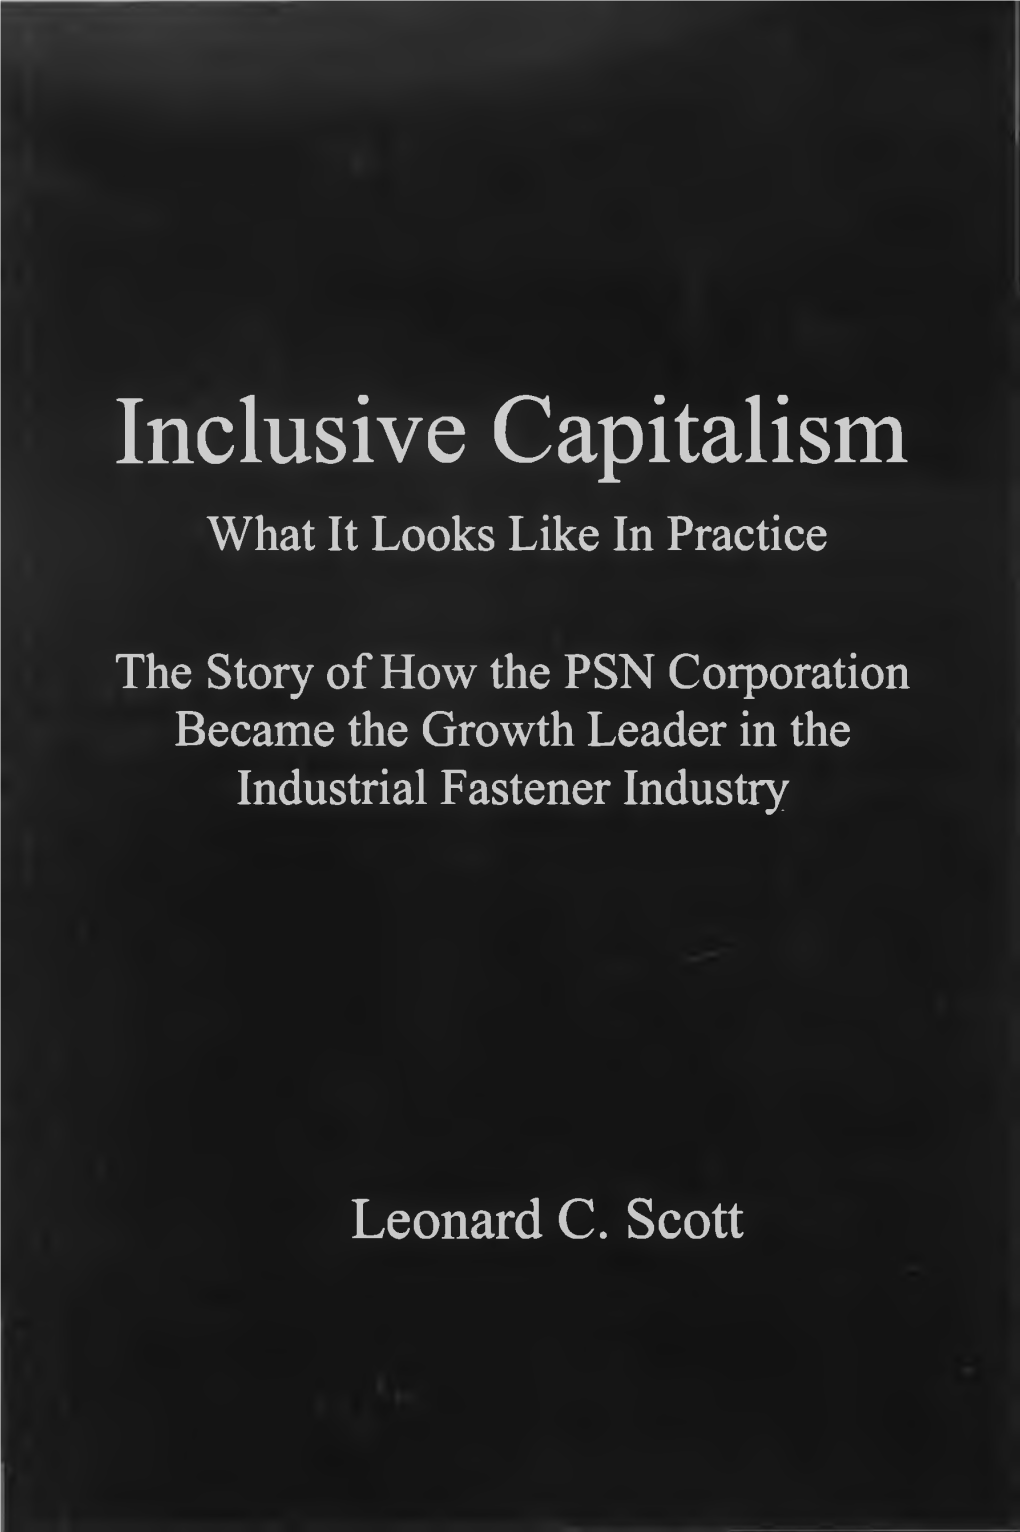 Inclusive Capitalism What It Looks Like in Practice